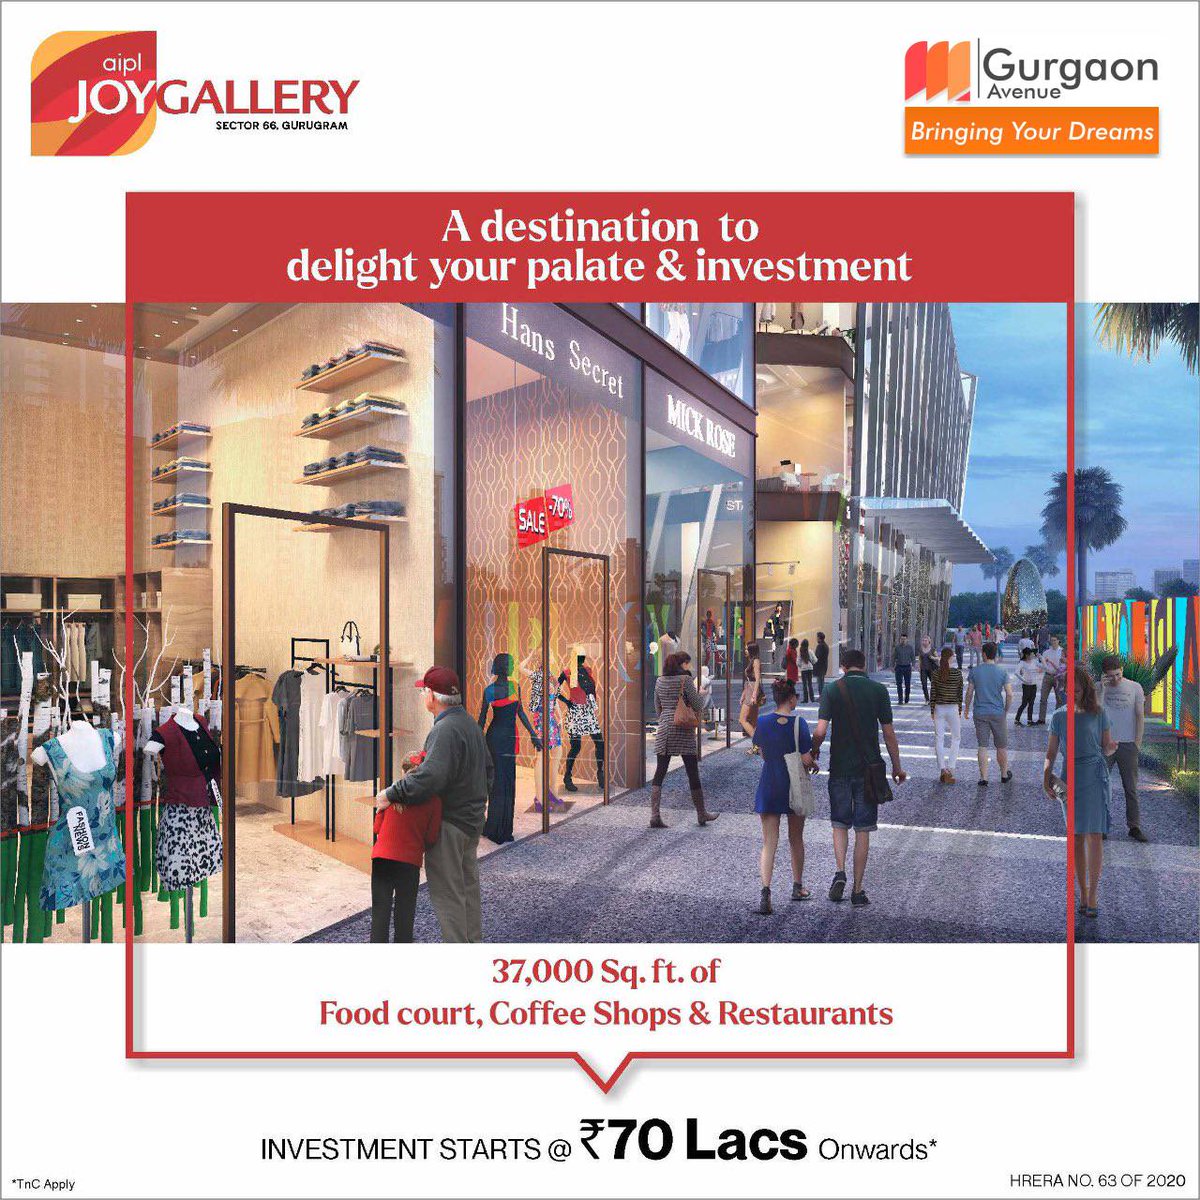 #AIPL Joy Gallery - in Sector 66, Gurugram, is fast emerging as the gourmet hotspot of the city. 
- Approx. 4.418 acres site.
- Designed by DP Architects, Singapore

#AIPLJoyGallery #JoyGallery #AIPL #Gurugram #GolfCourseExtentionRoad #Restaurants #Cafe #FoodCourt #gurgaonavenue